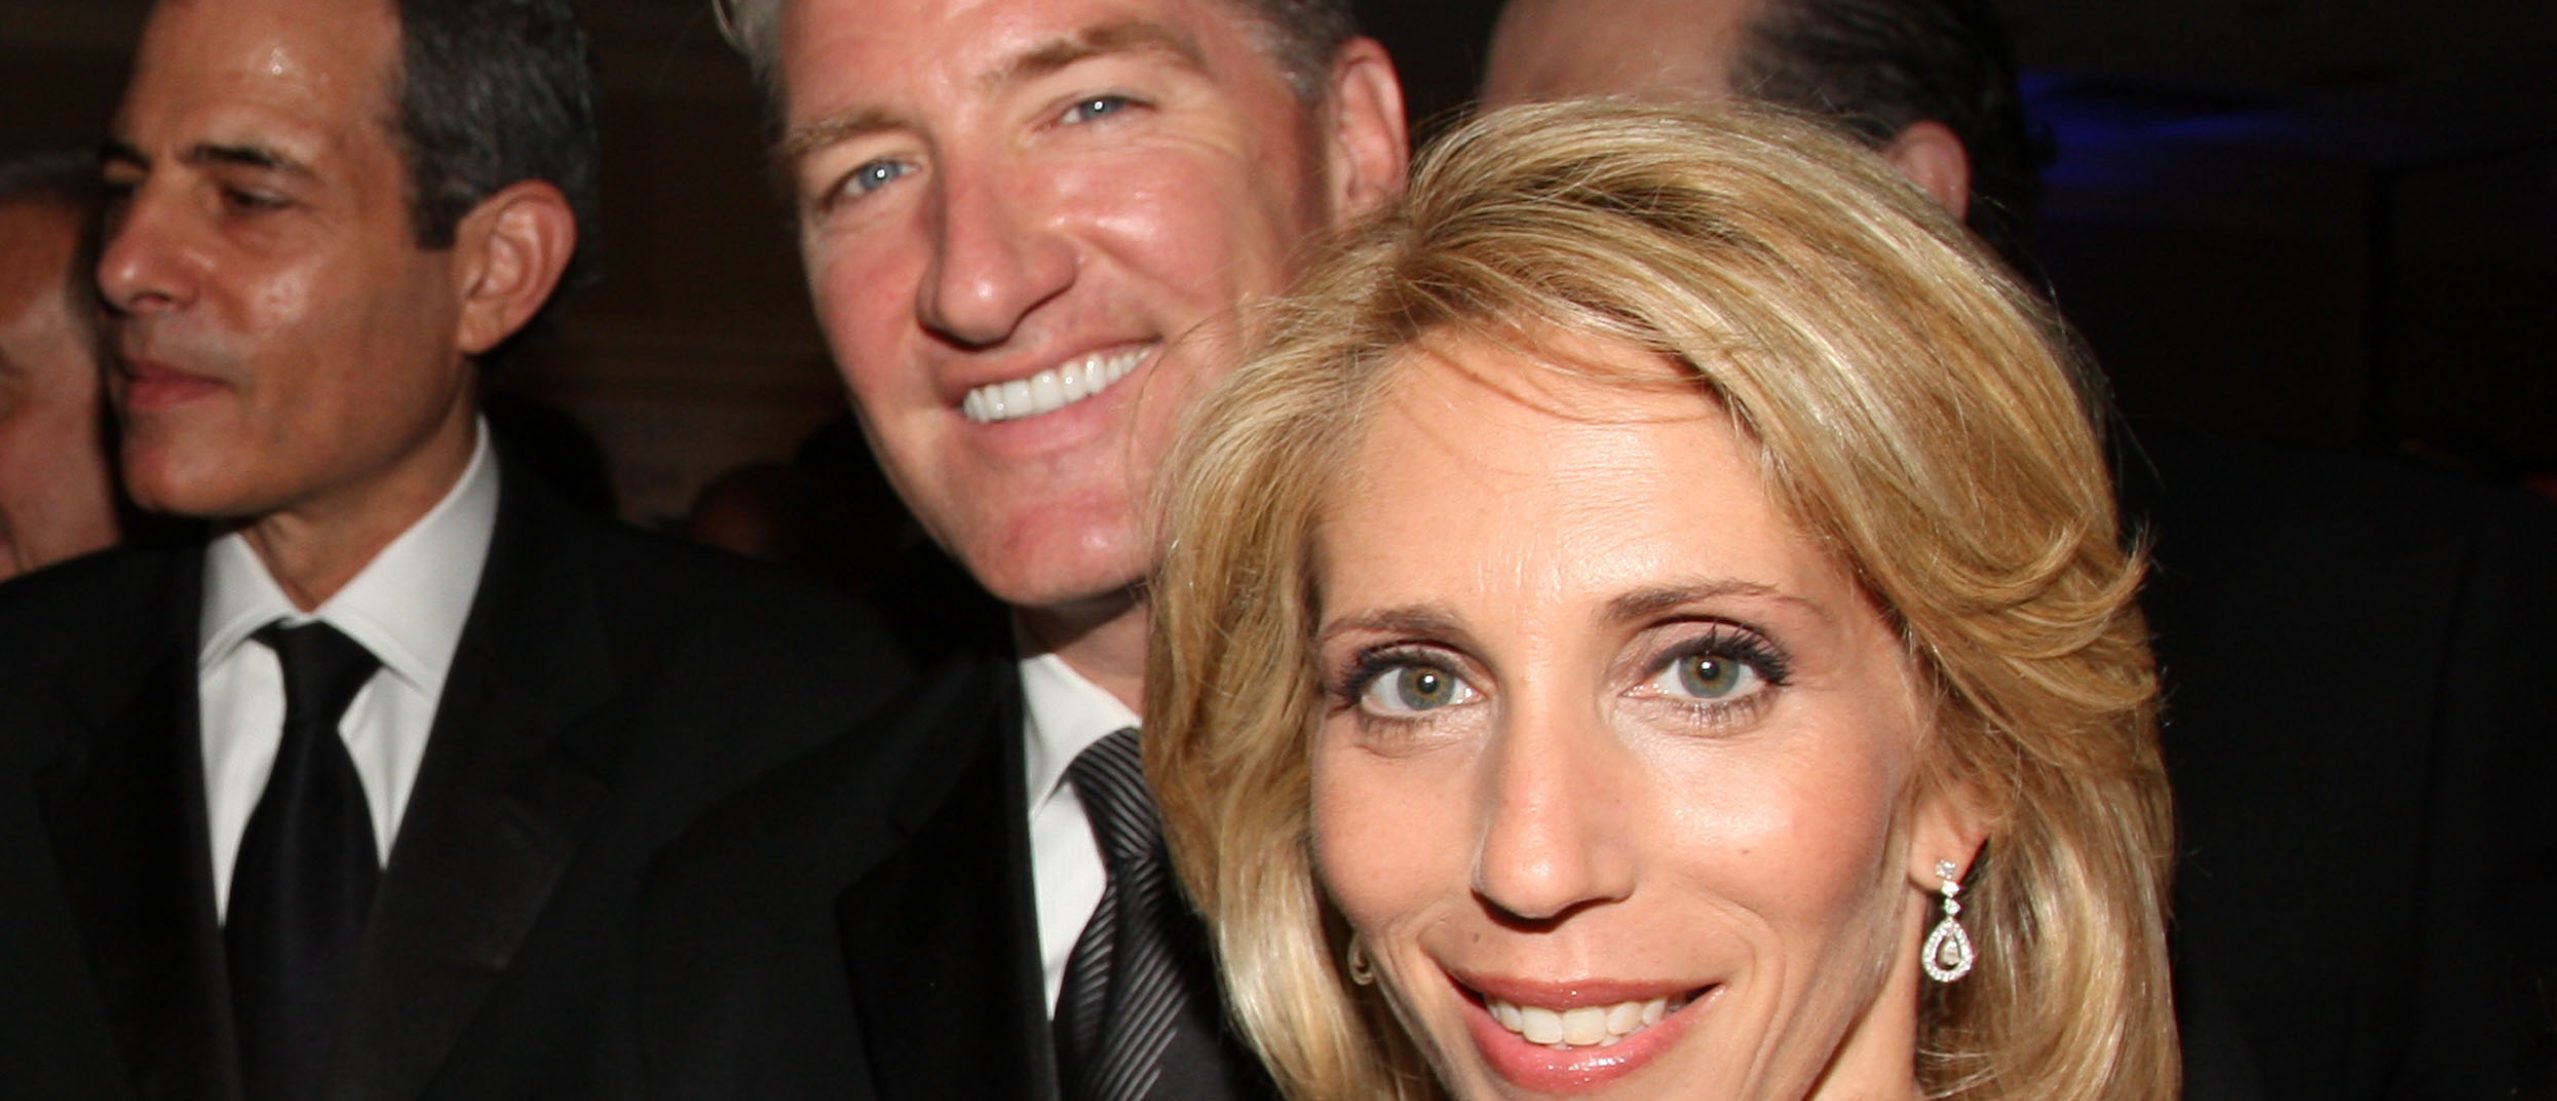 Cnn Host John King Gets Replaced By Ex Wife Dana Bash The Daily Caller 